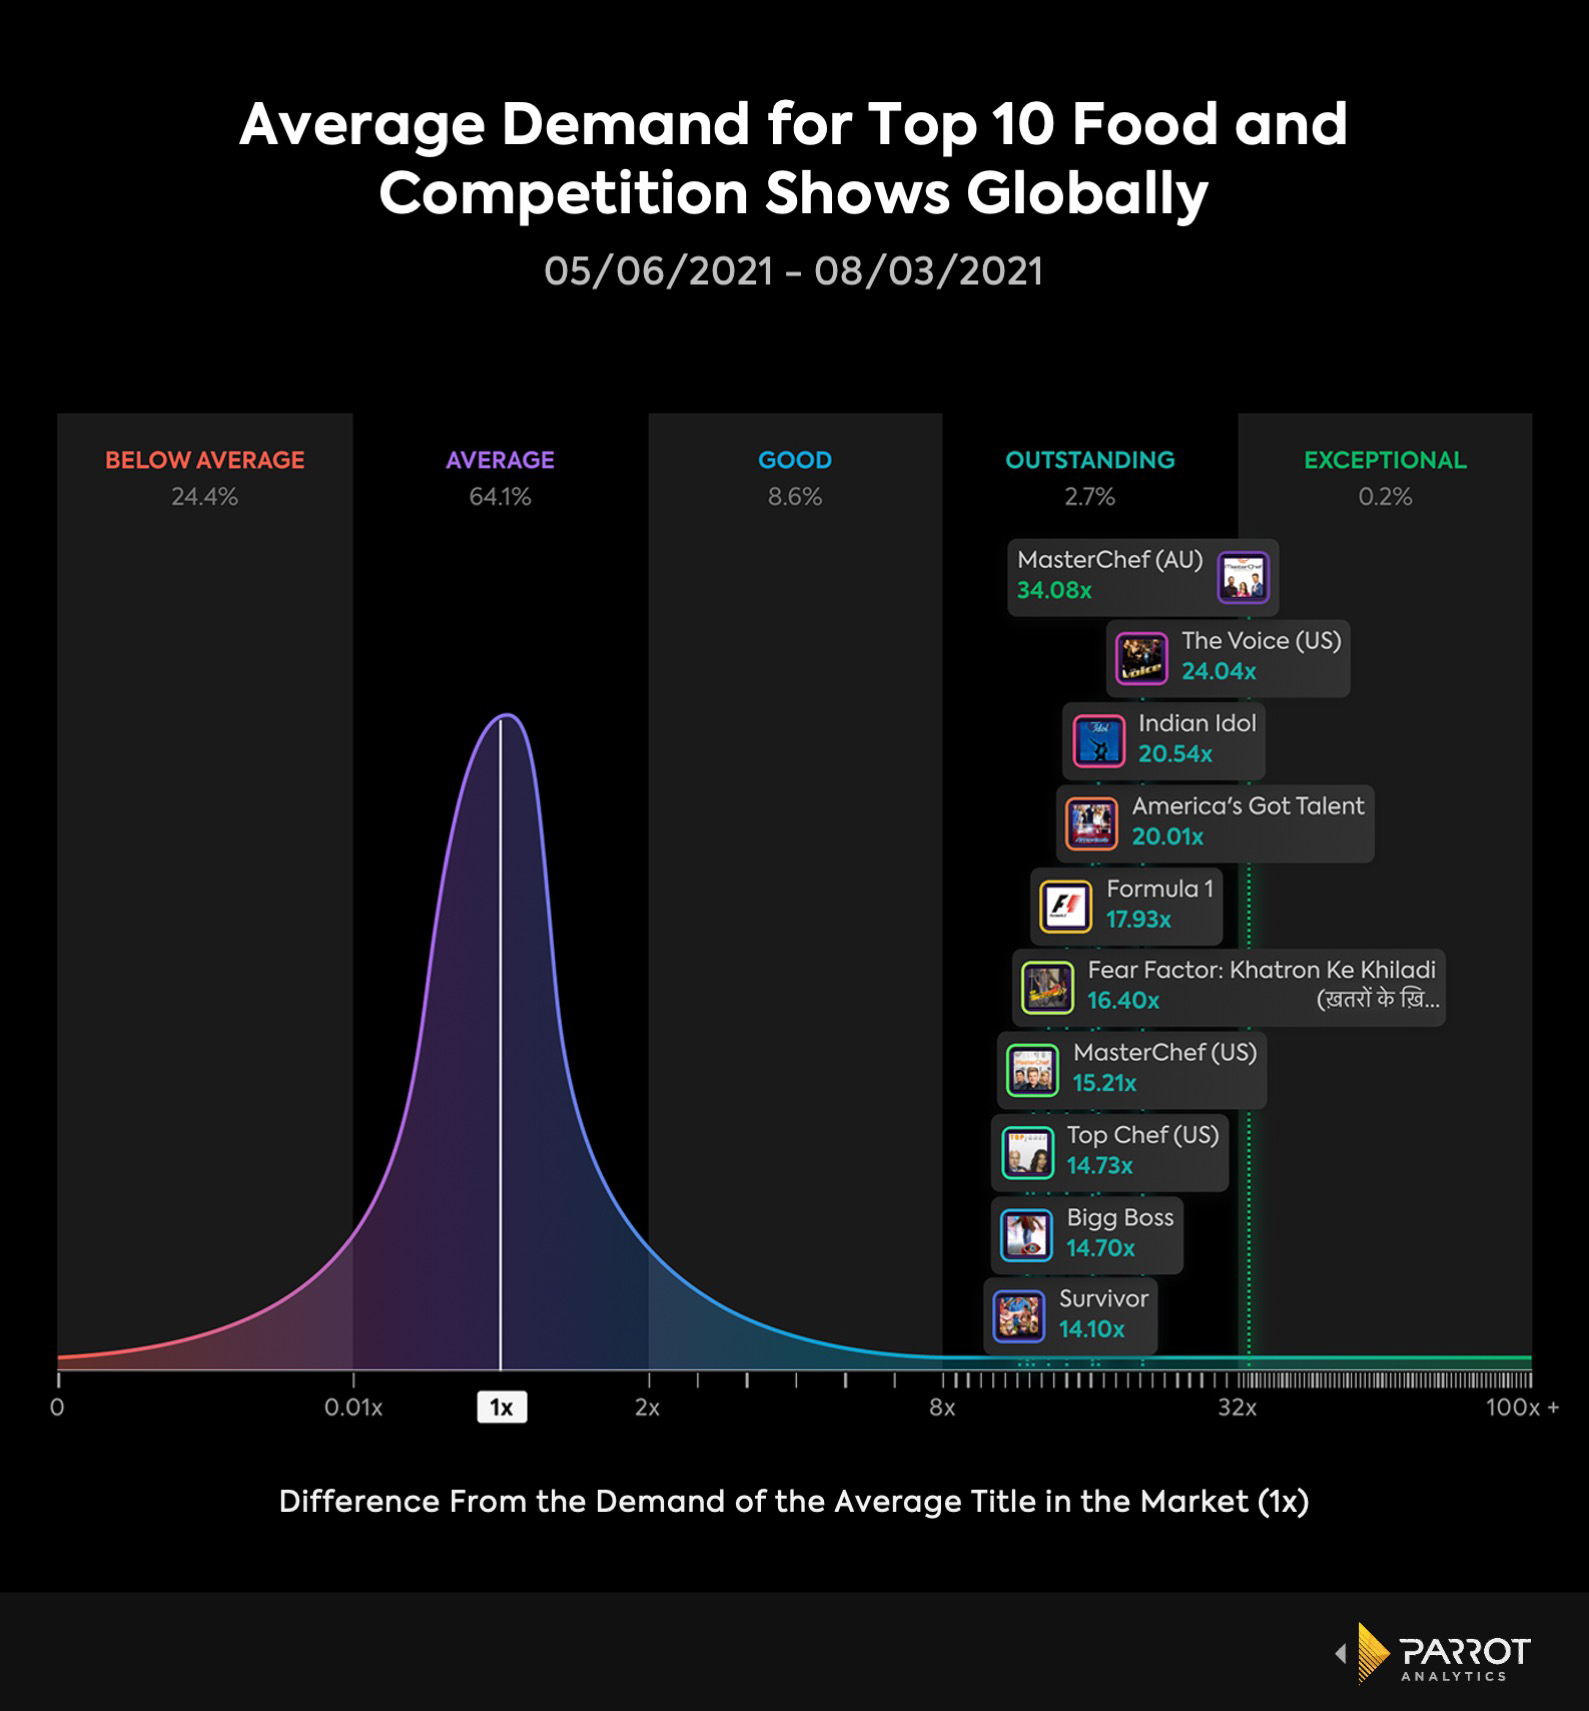 Parrot_Average Demand for Top 10 Food and Competition.jpg